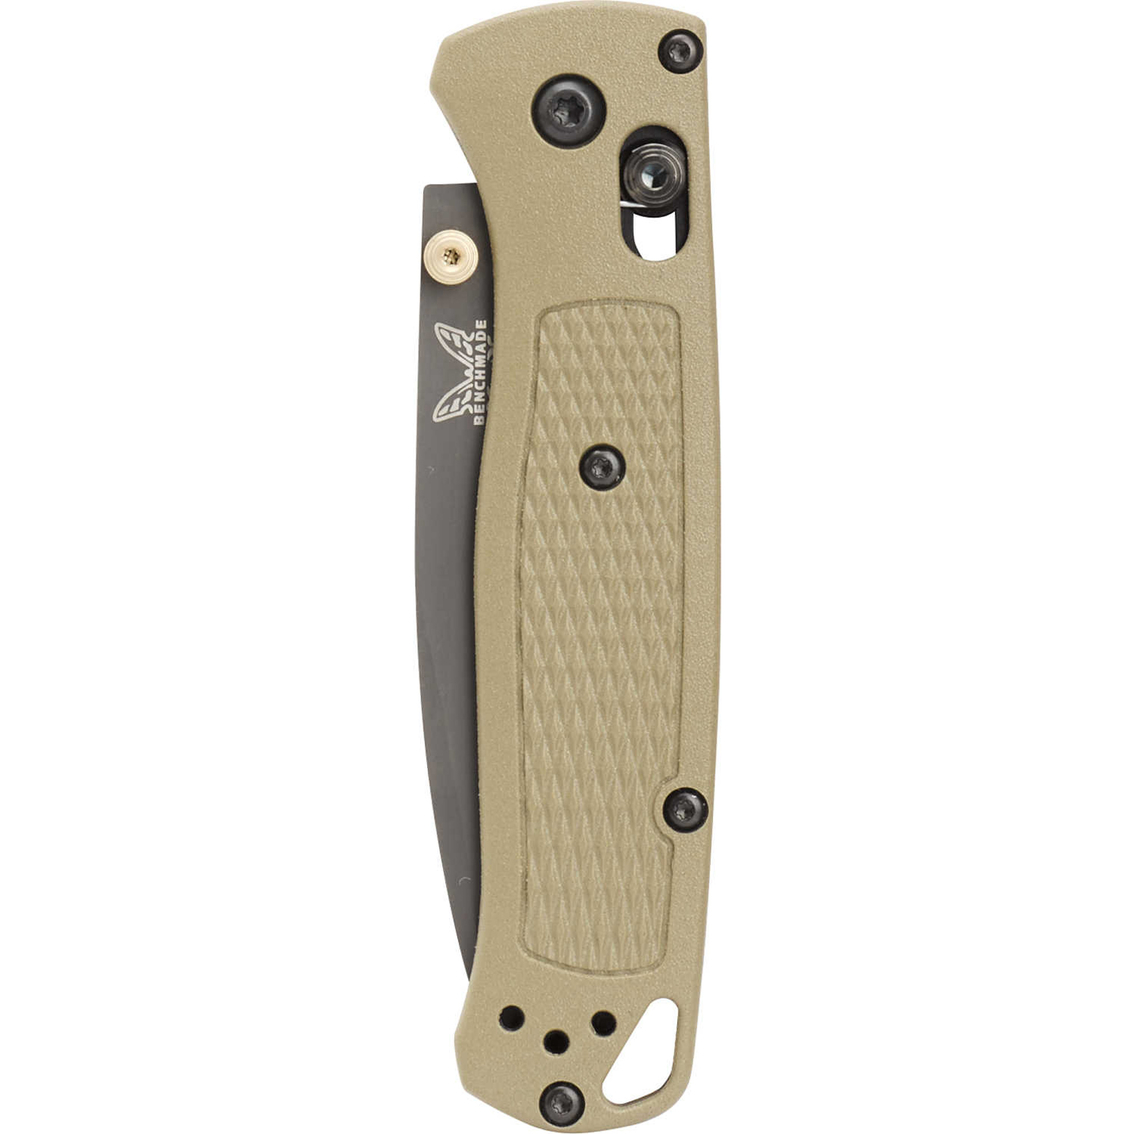 Benchmade Bugout Knife - Image 2 of 2